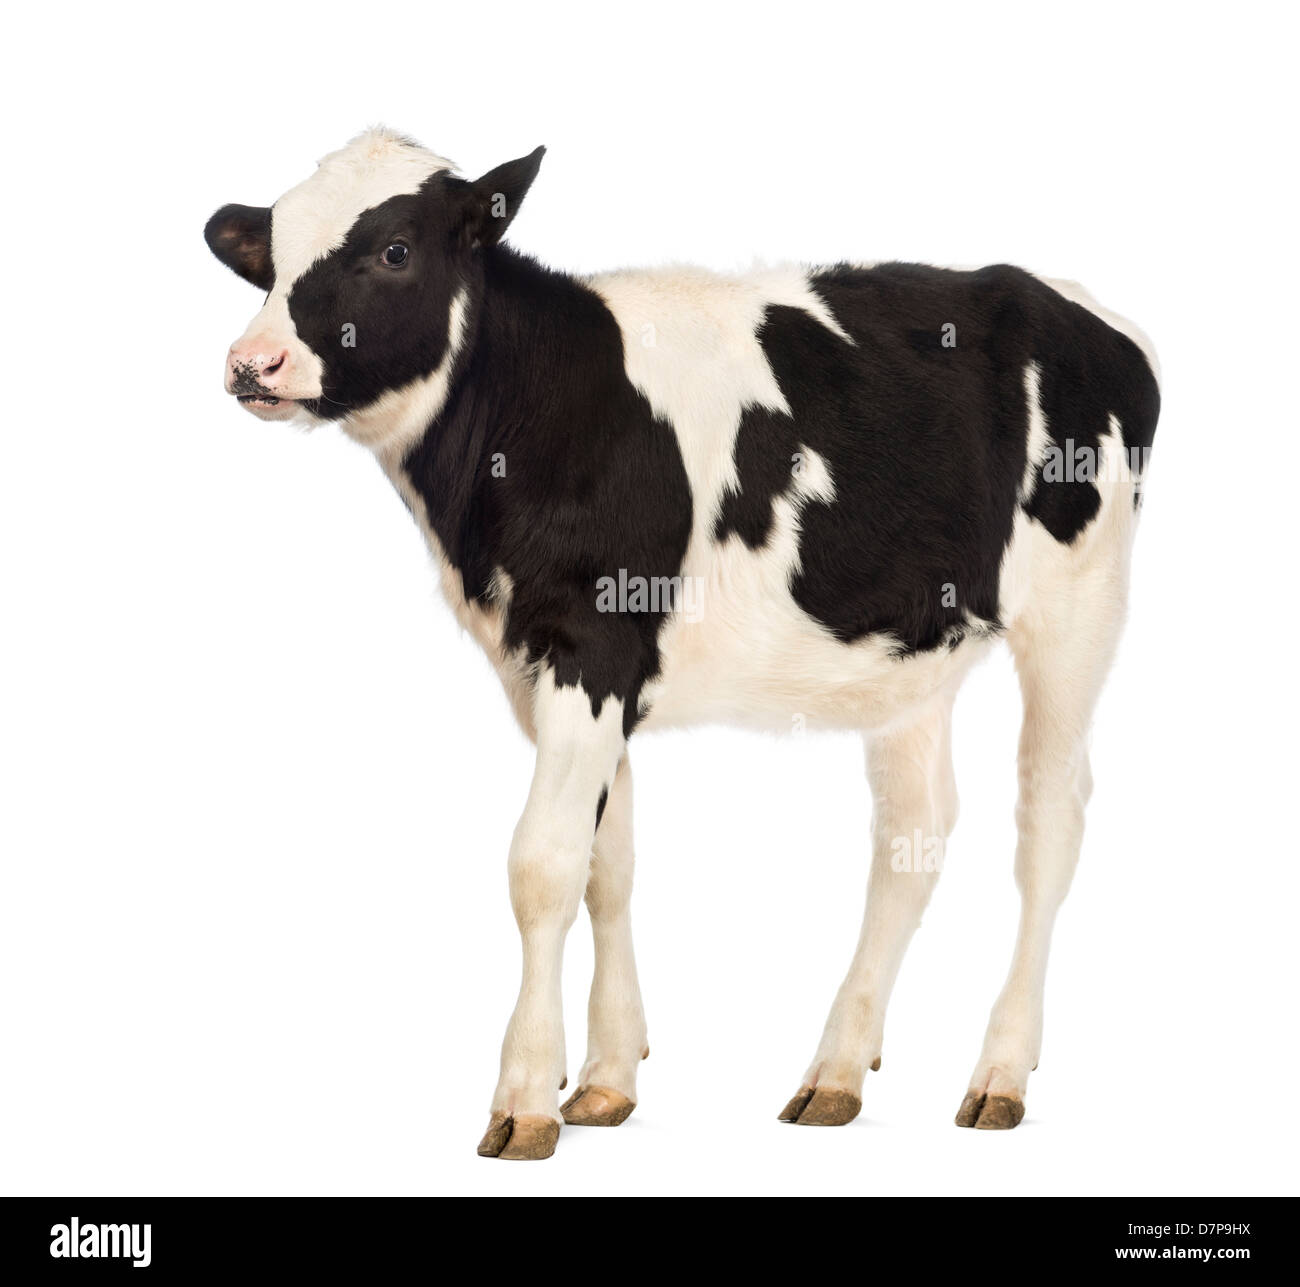 Veal calf, 8 months old, in front of white background Stock Photo - Alamy